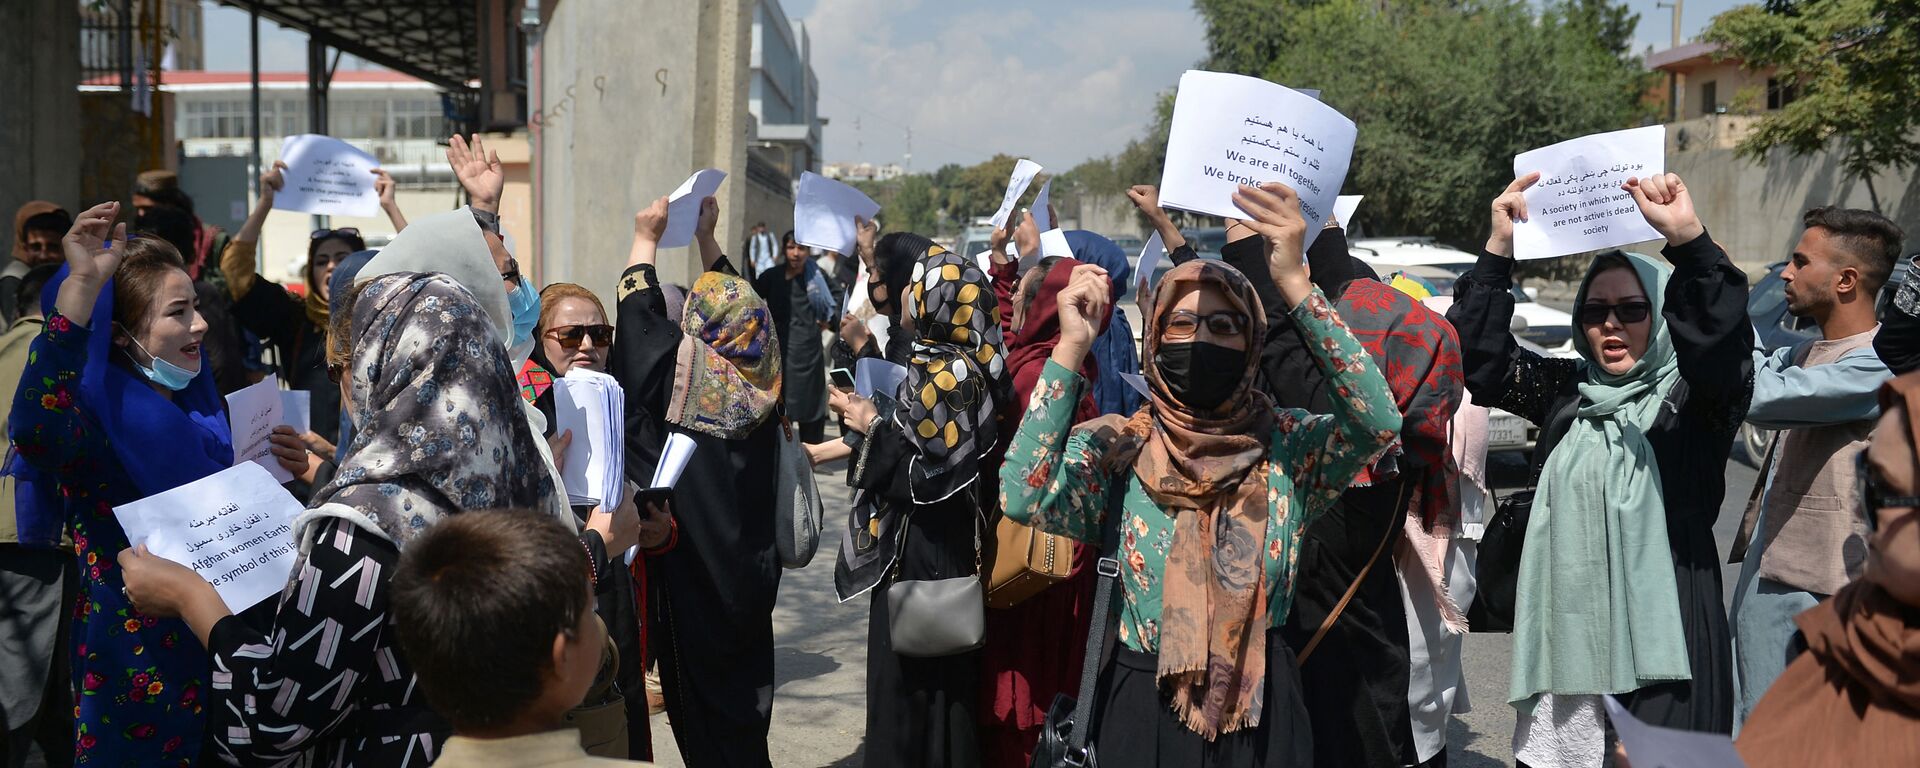 Afghan women take part in a protest march for their rights under the Taliban rule in the downtown area of Kabul on September 3, 2021.  - Sputnik International, 1920